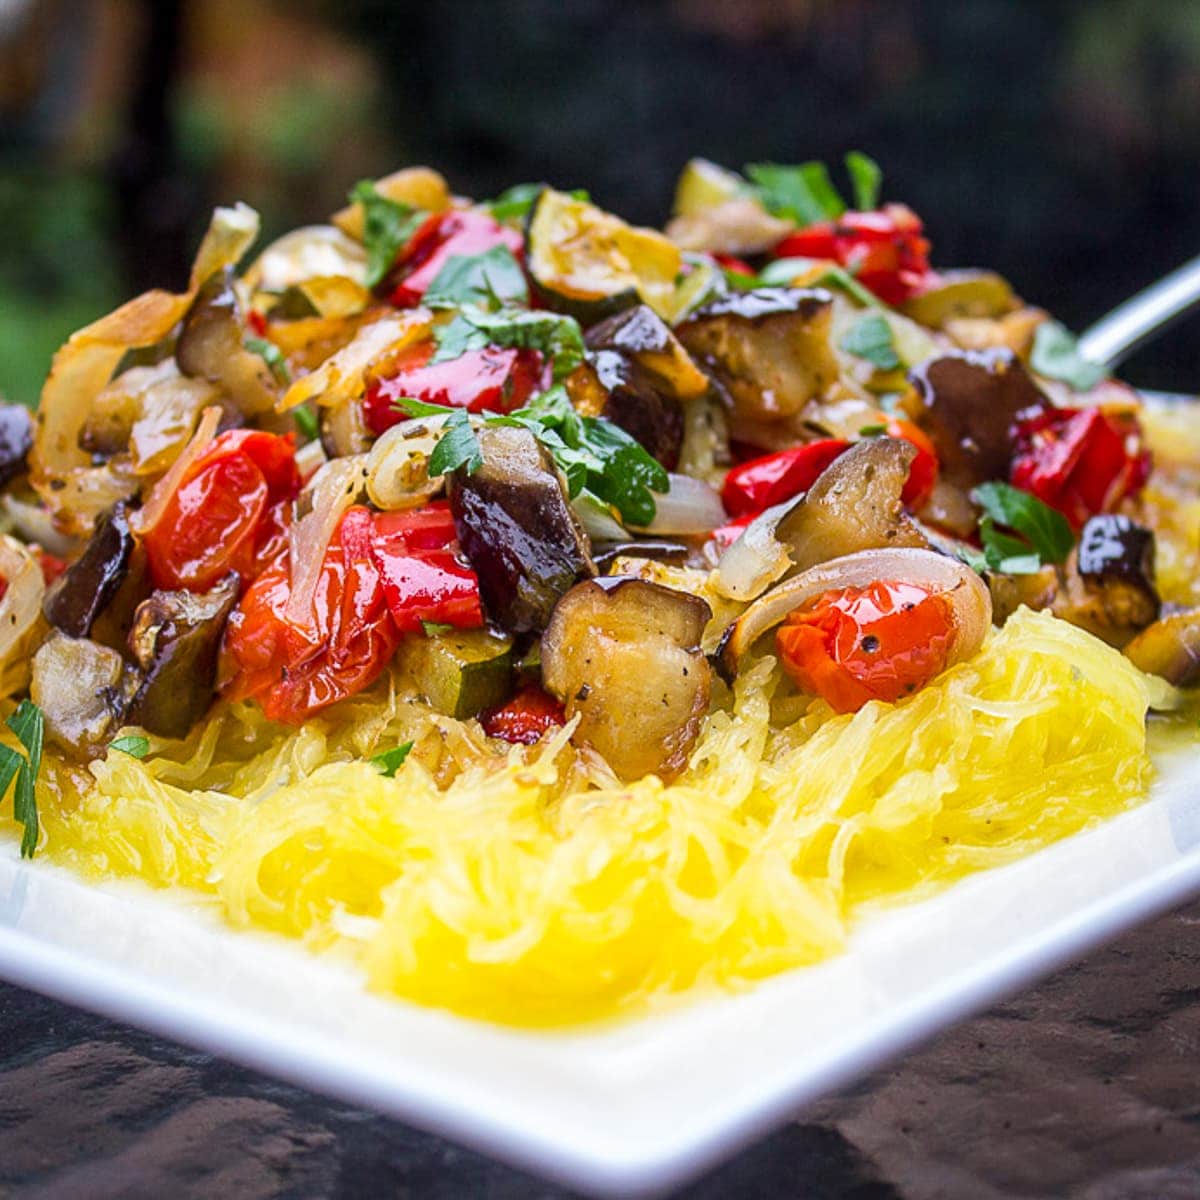 Spaghetti Squash Noodles With Roasted Vegetables